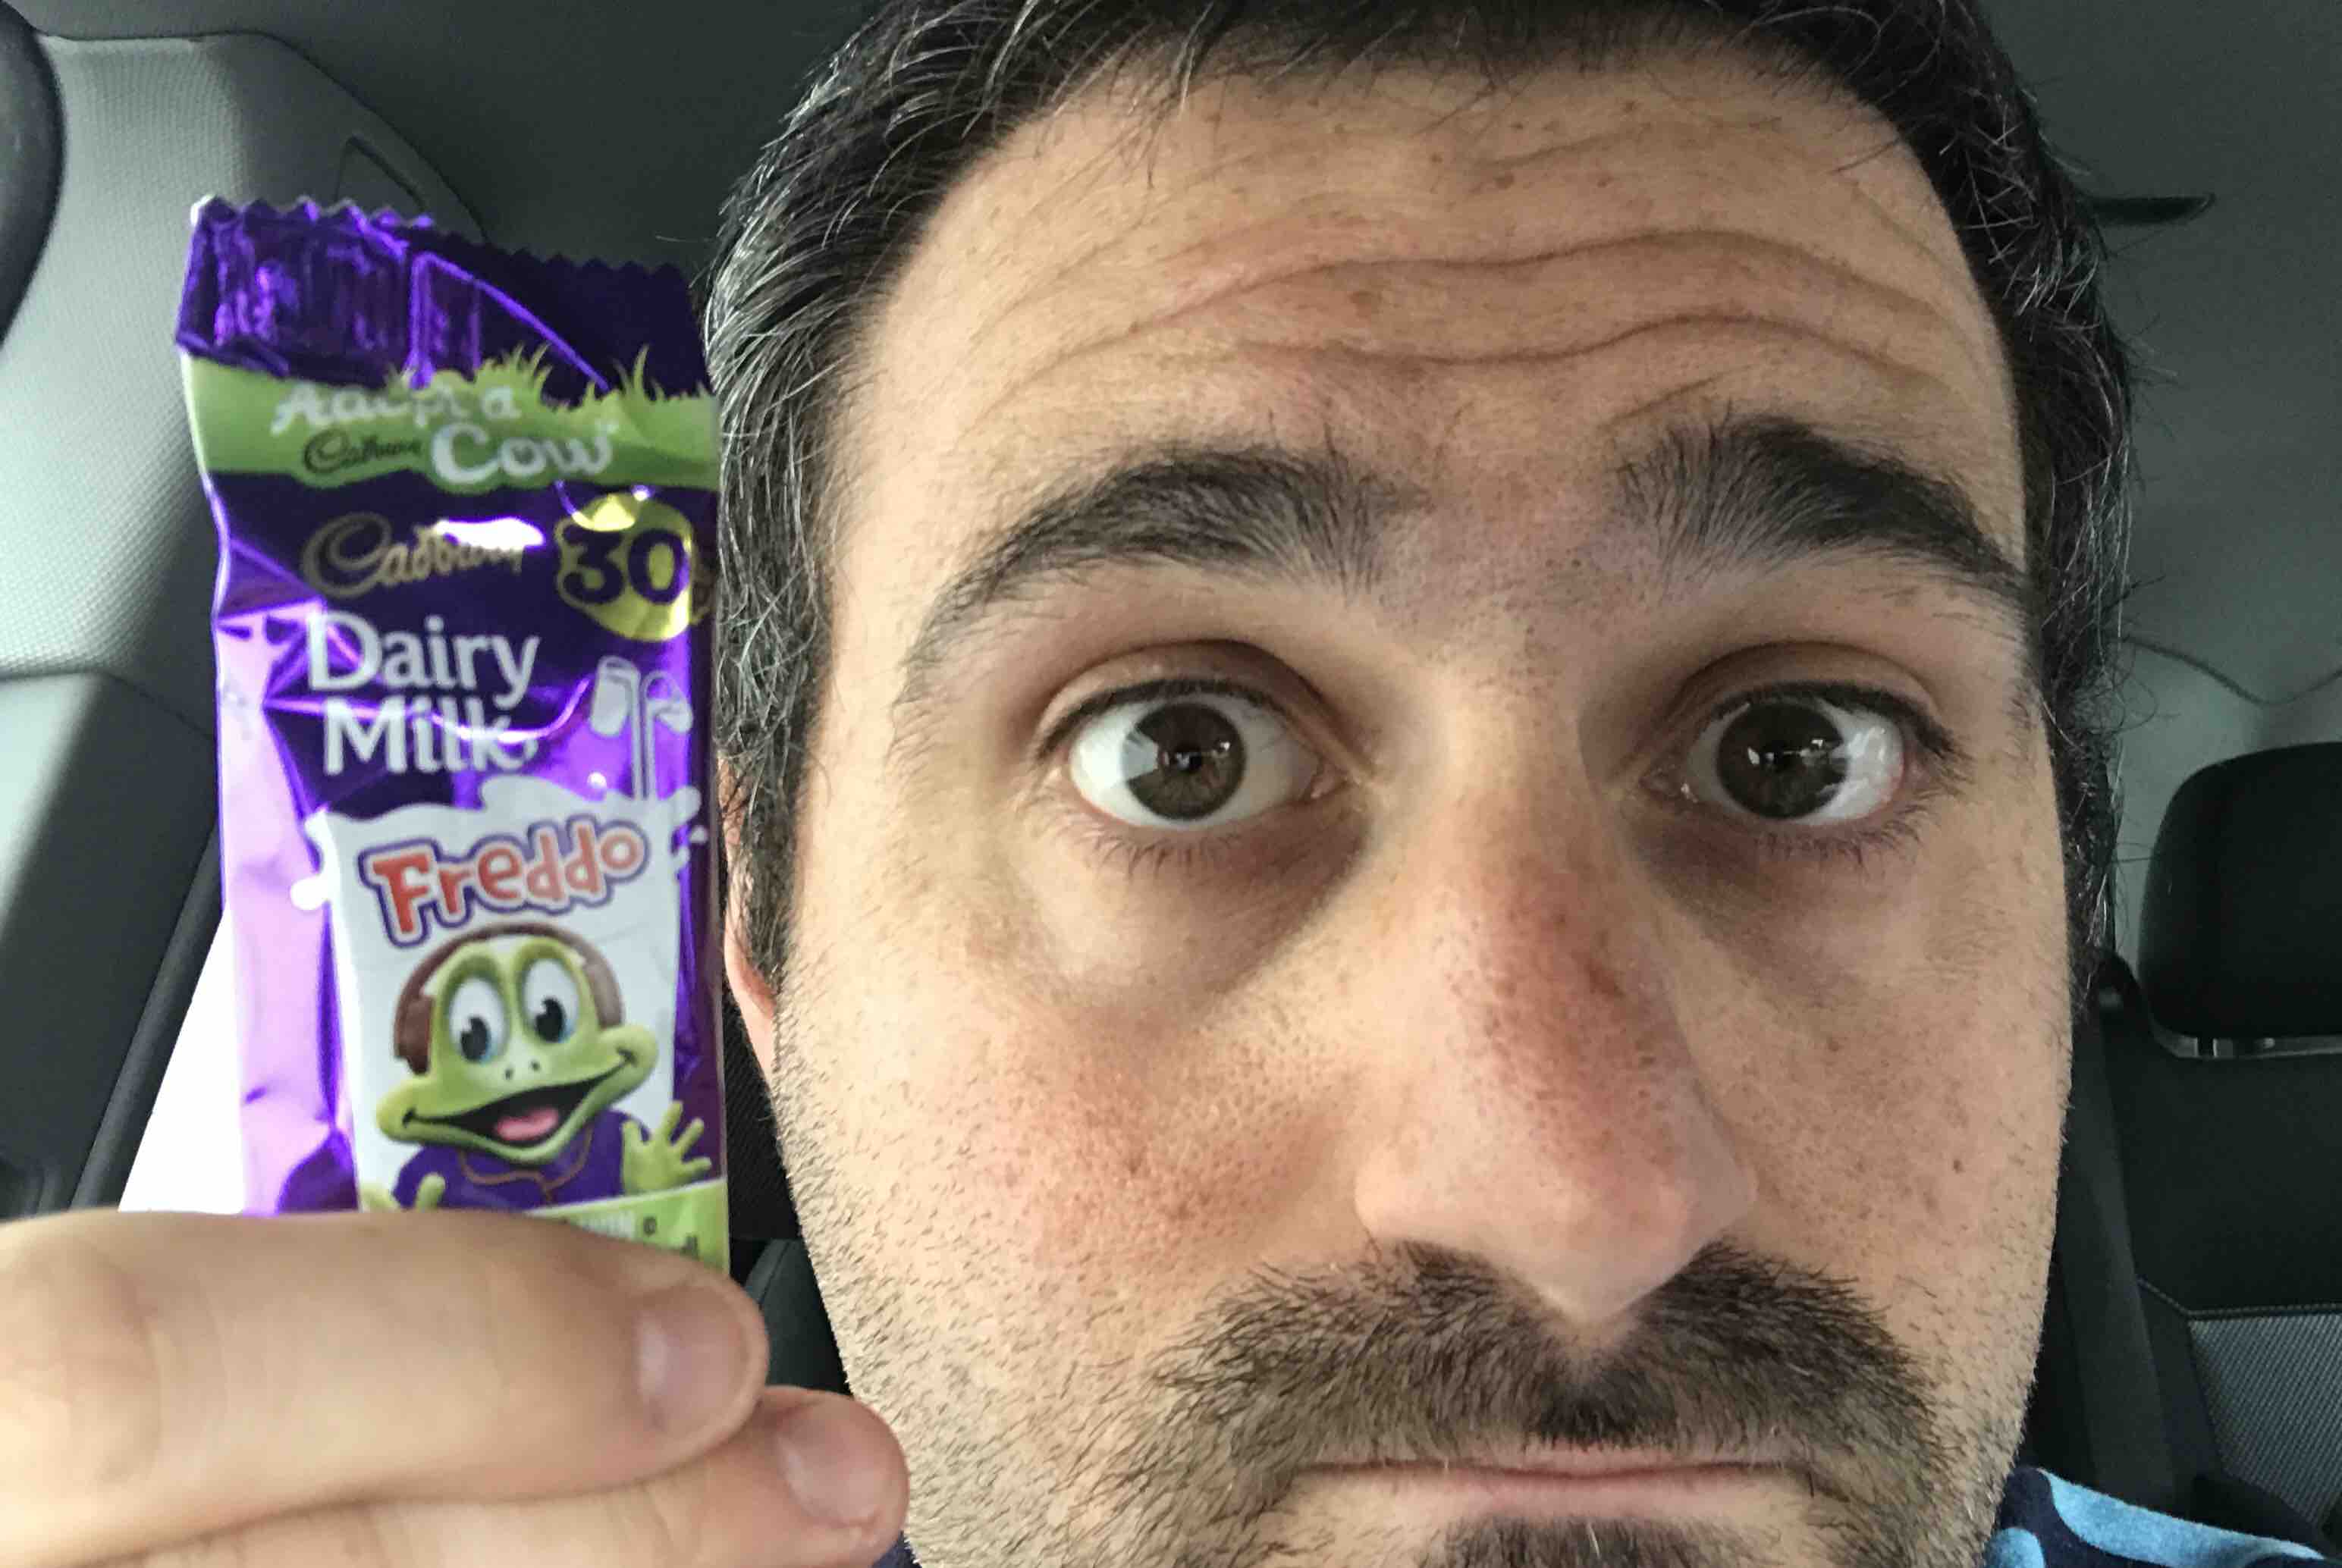 Man angry about Brexit-related Freddo price hike launches fundraising appeal to buy lifetime’s supply